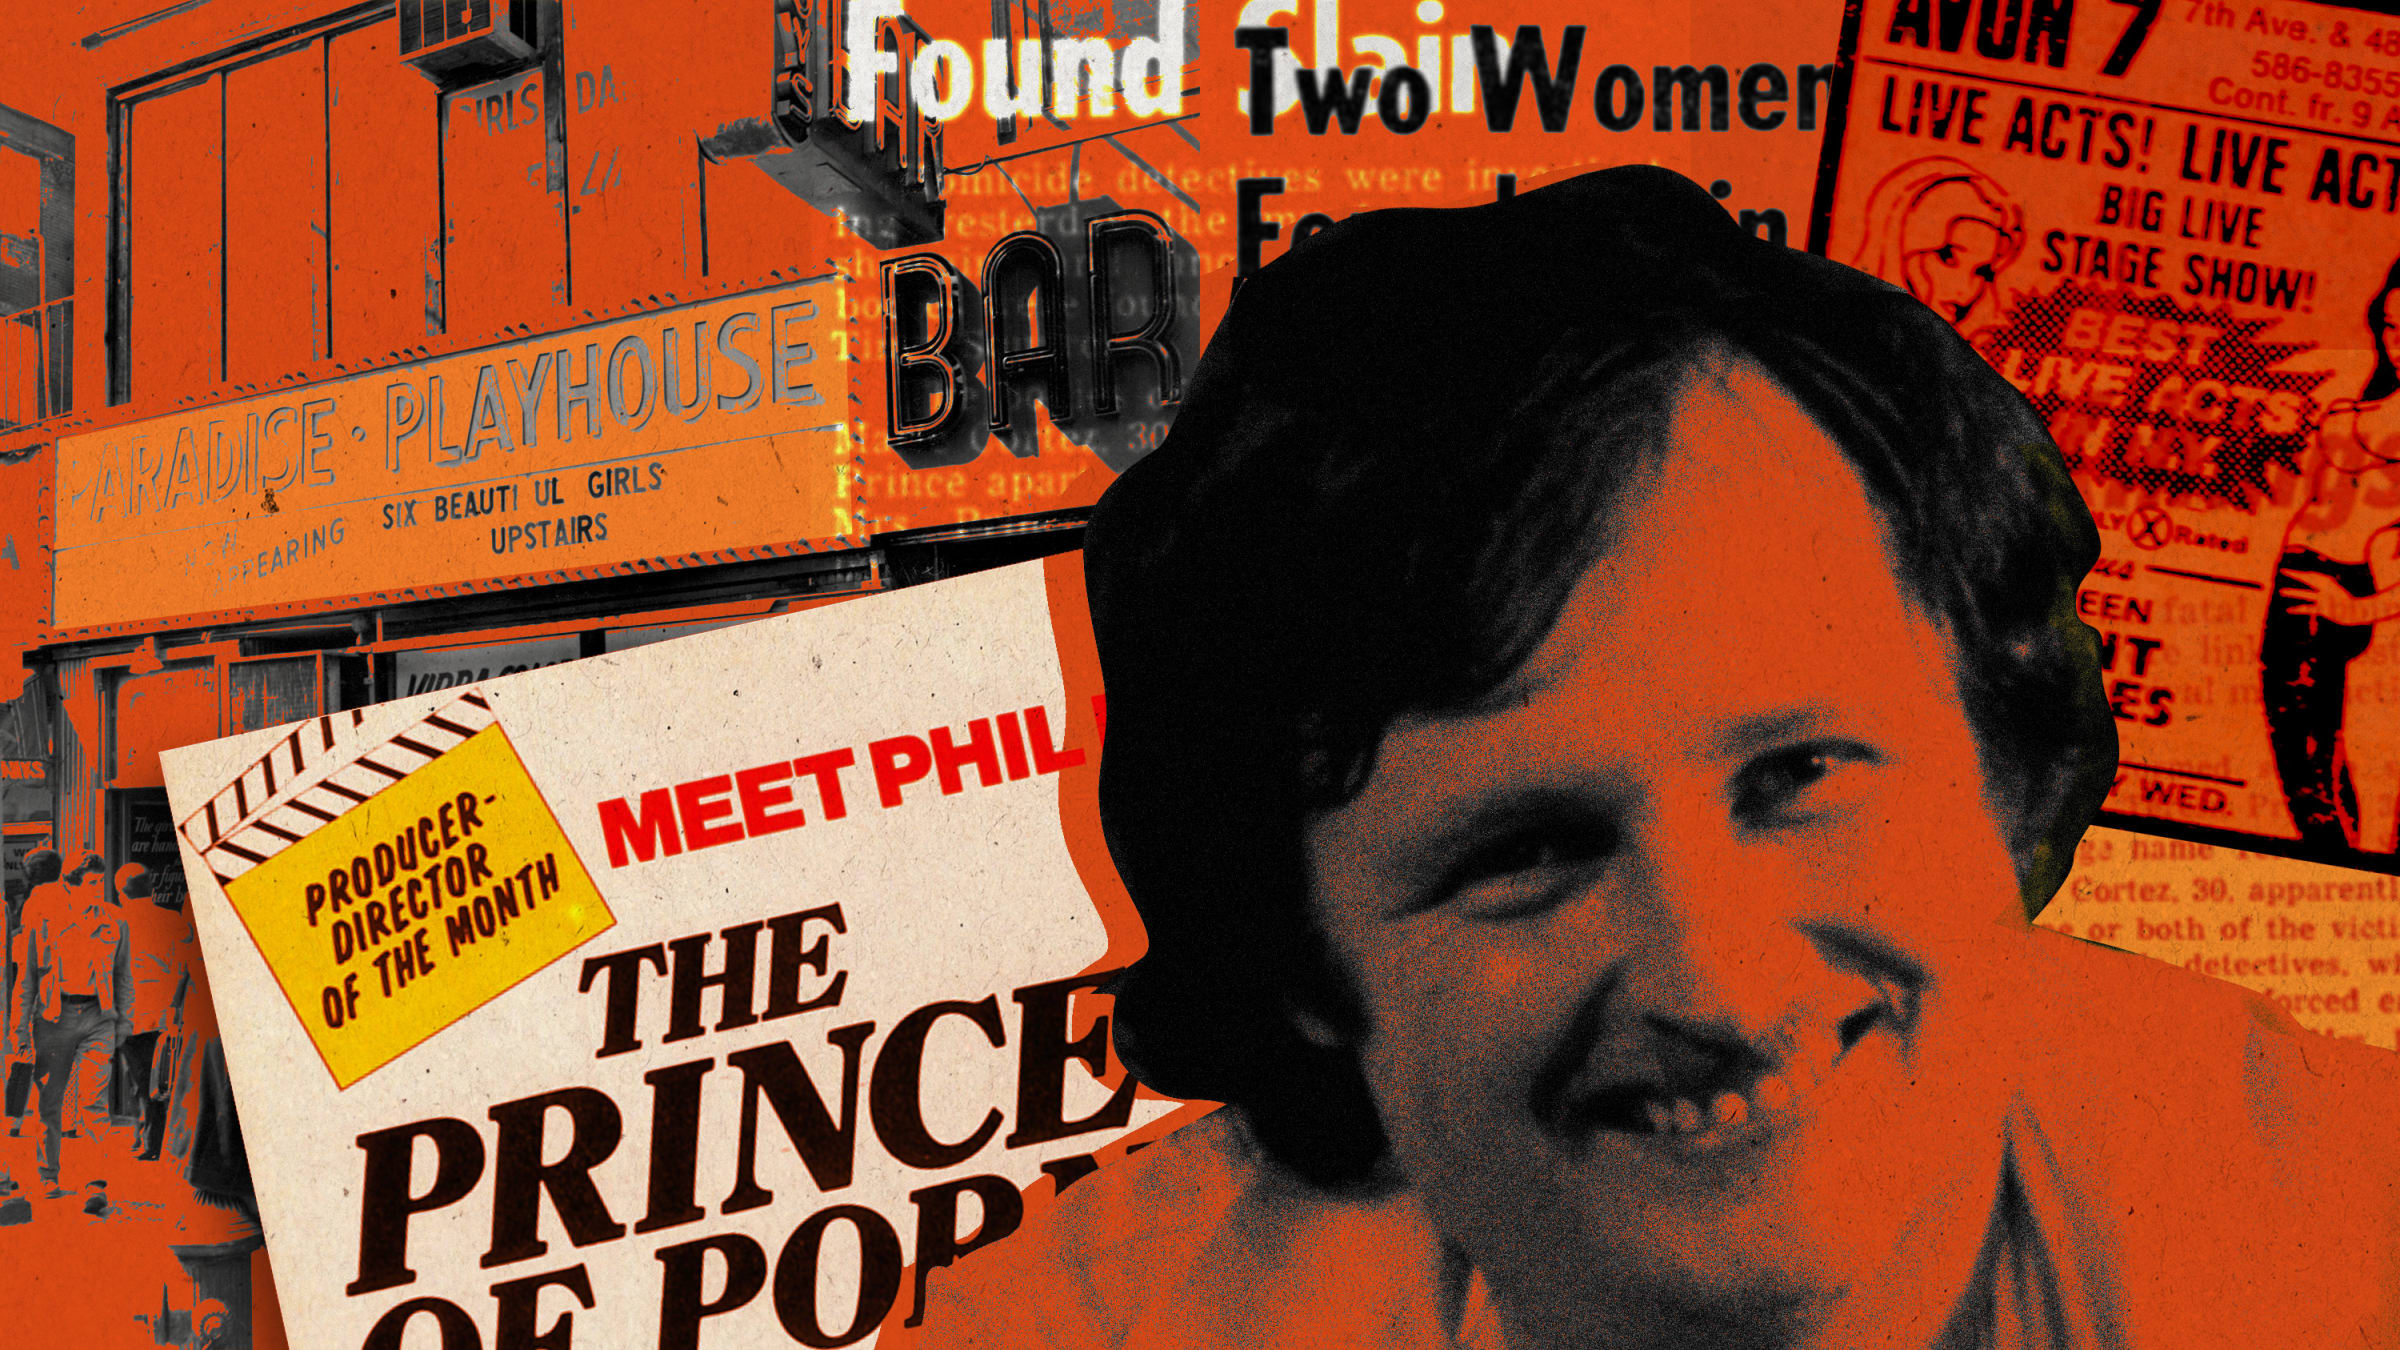 Samll Garils Foking Tite - The Porn Prince of New York's Live Sex Shows in 1970s Times Square